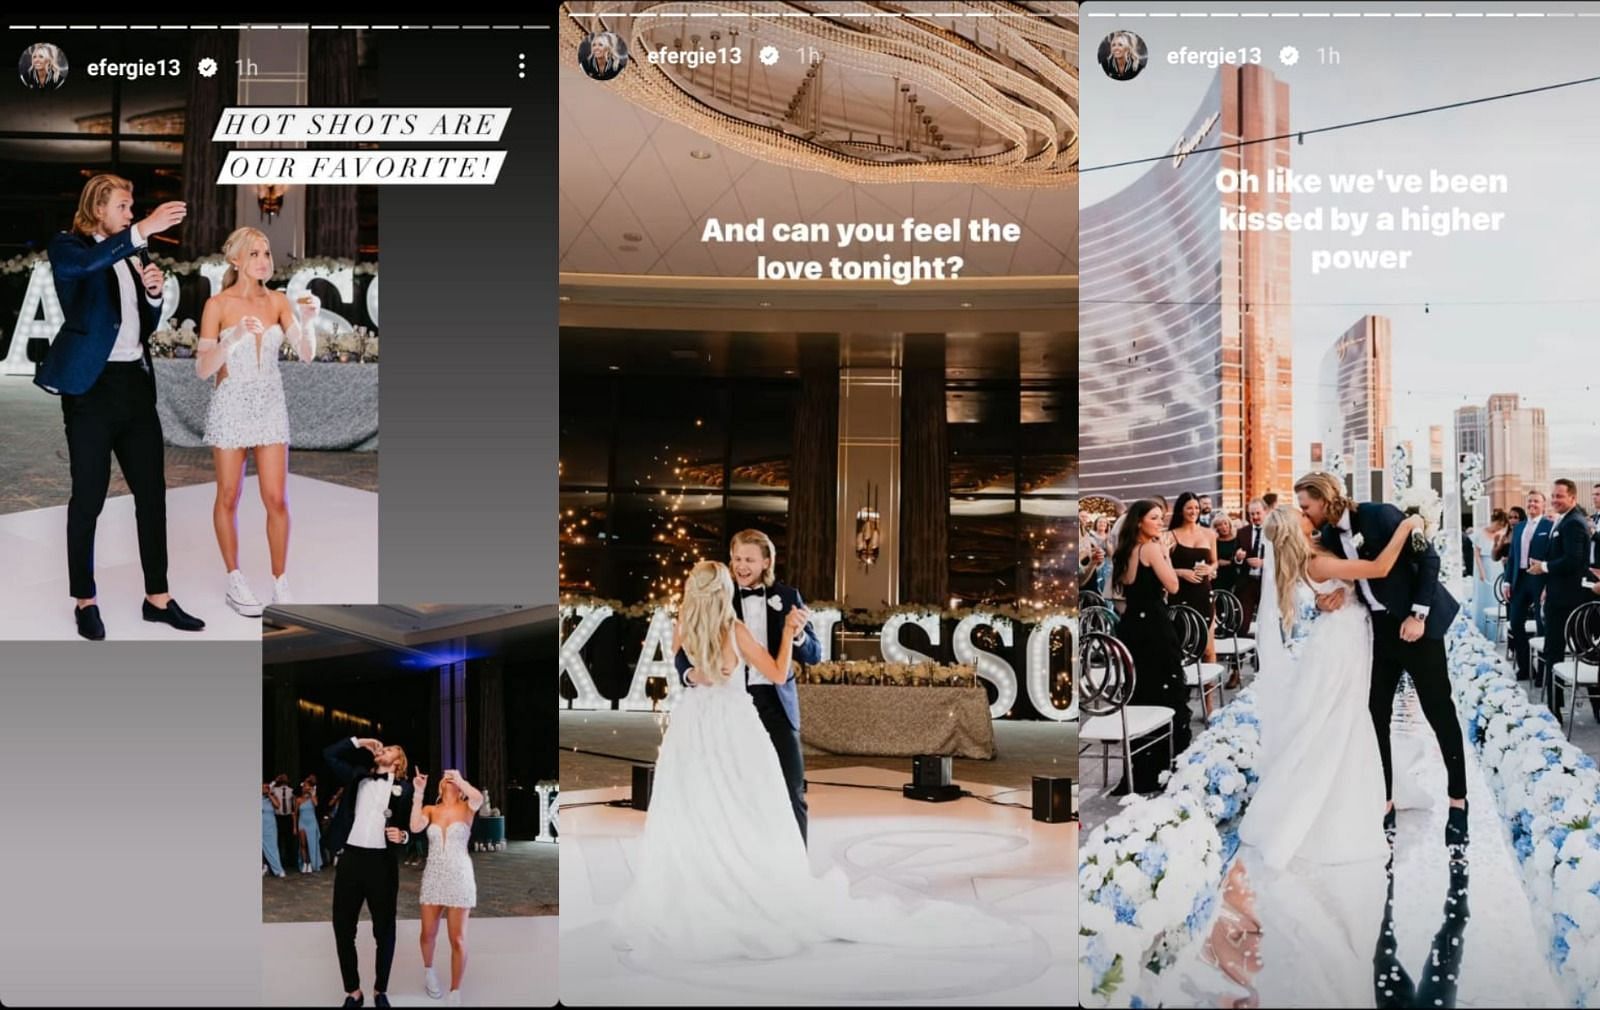 Inside William Karlsson's marriage to wife Emily as pair welcome